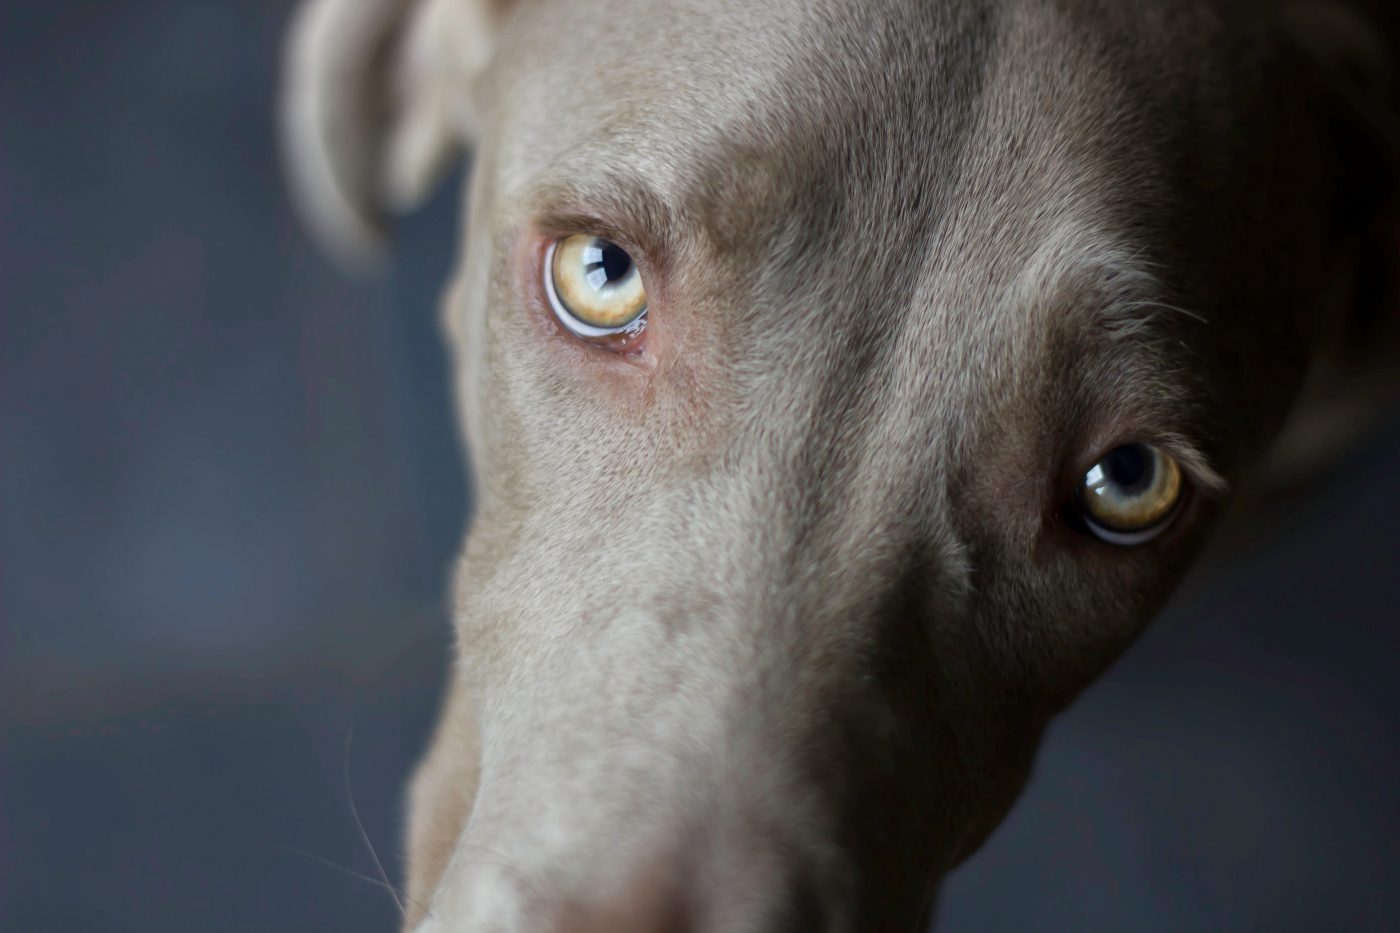 Do dogs have a wider field of vision than humans?